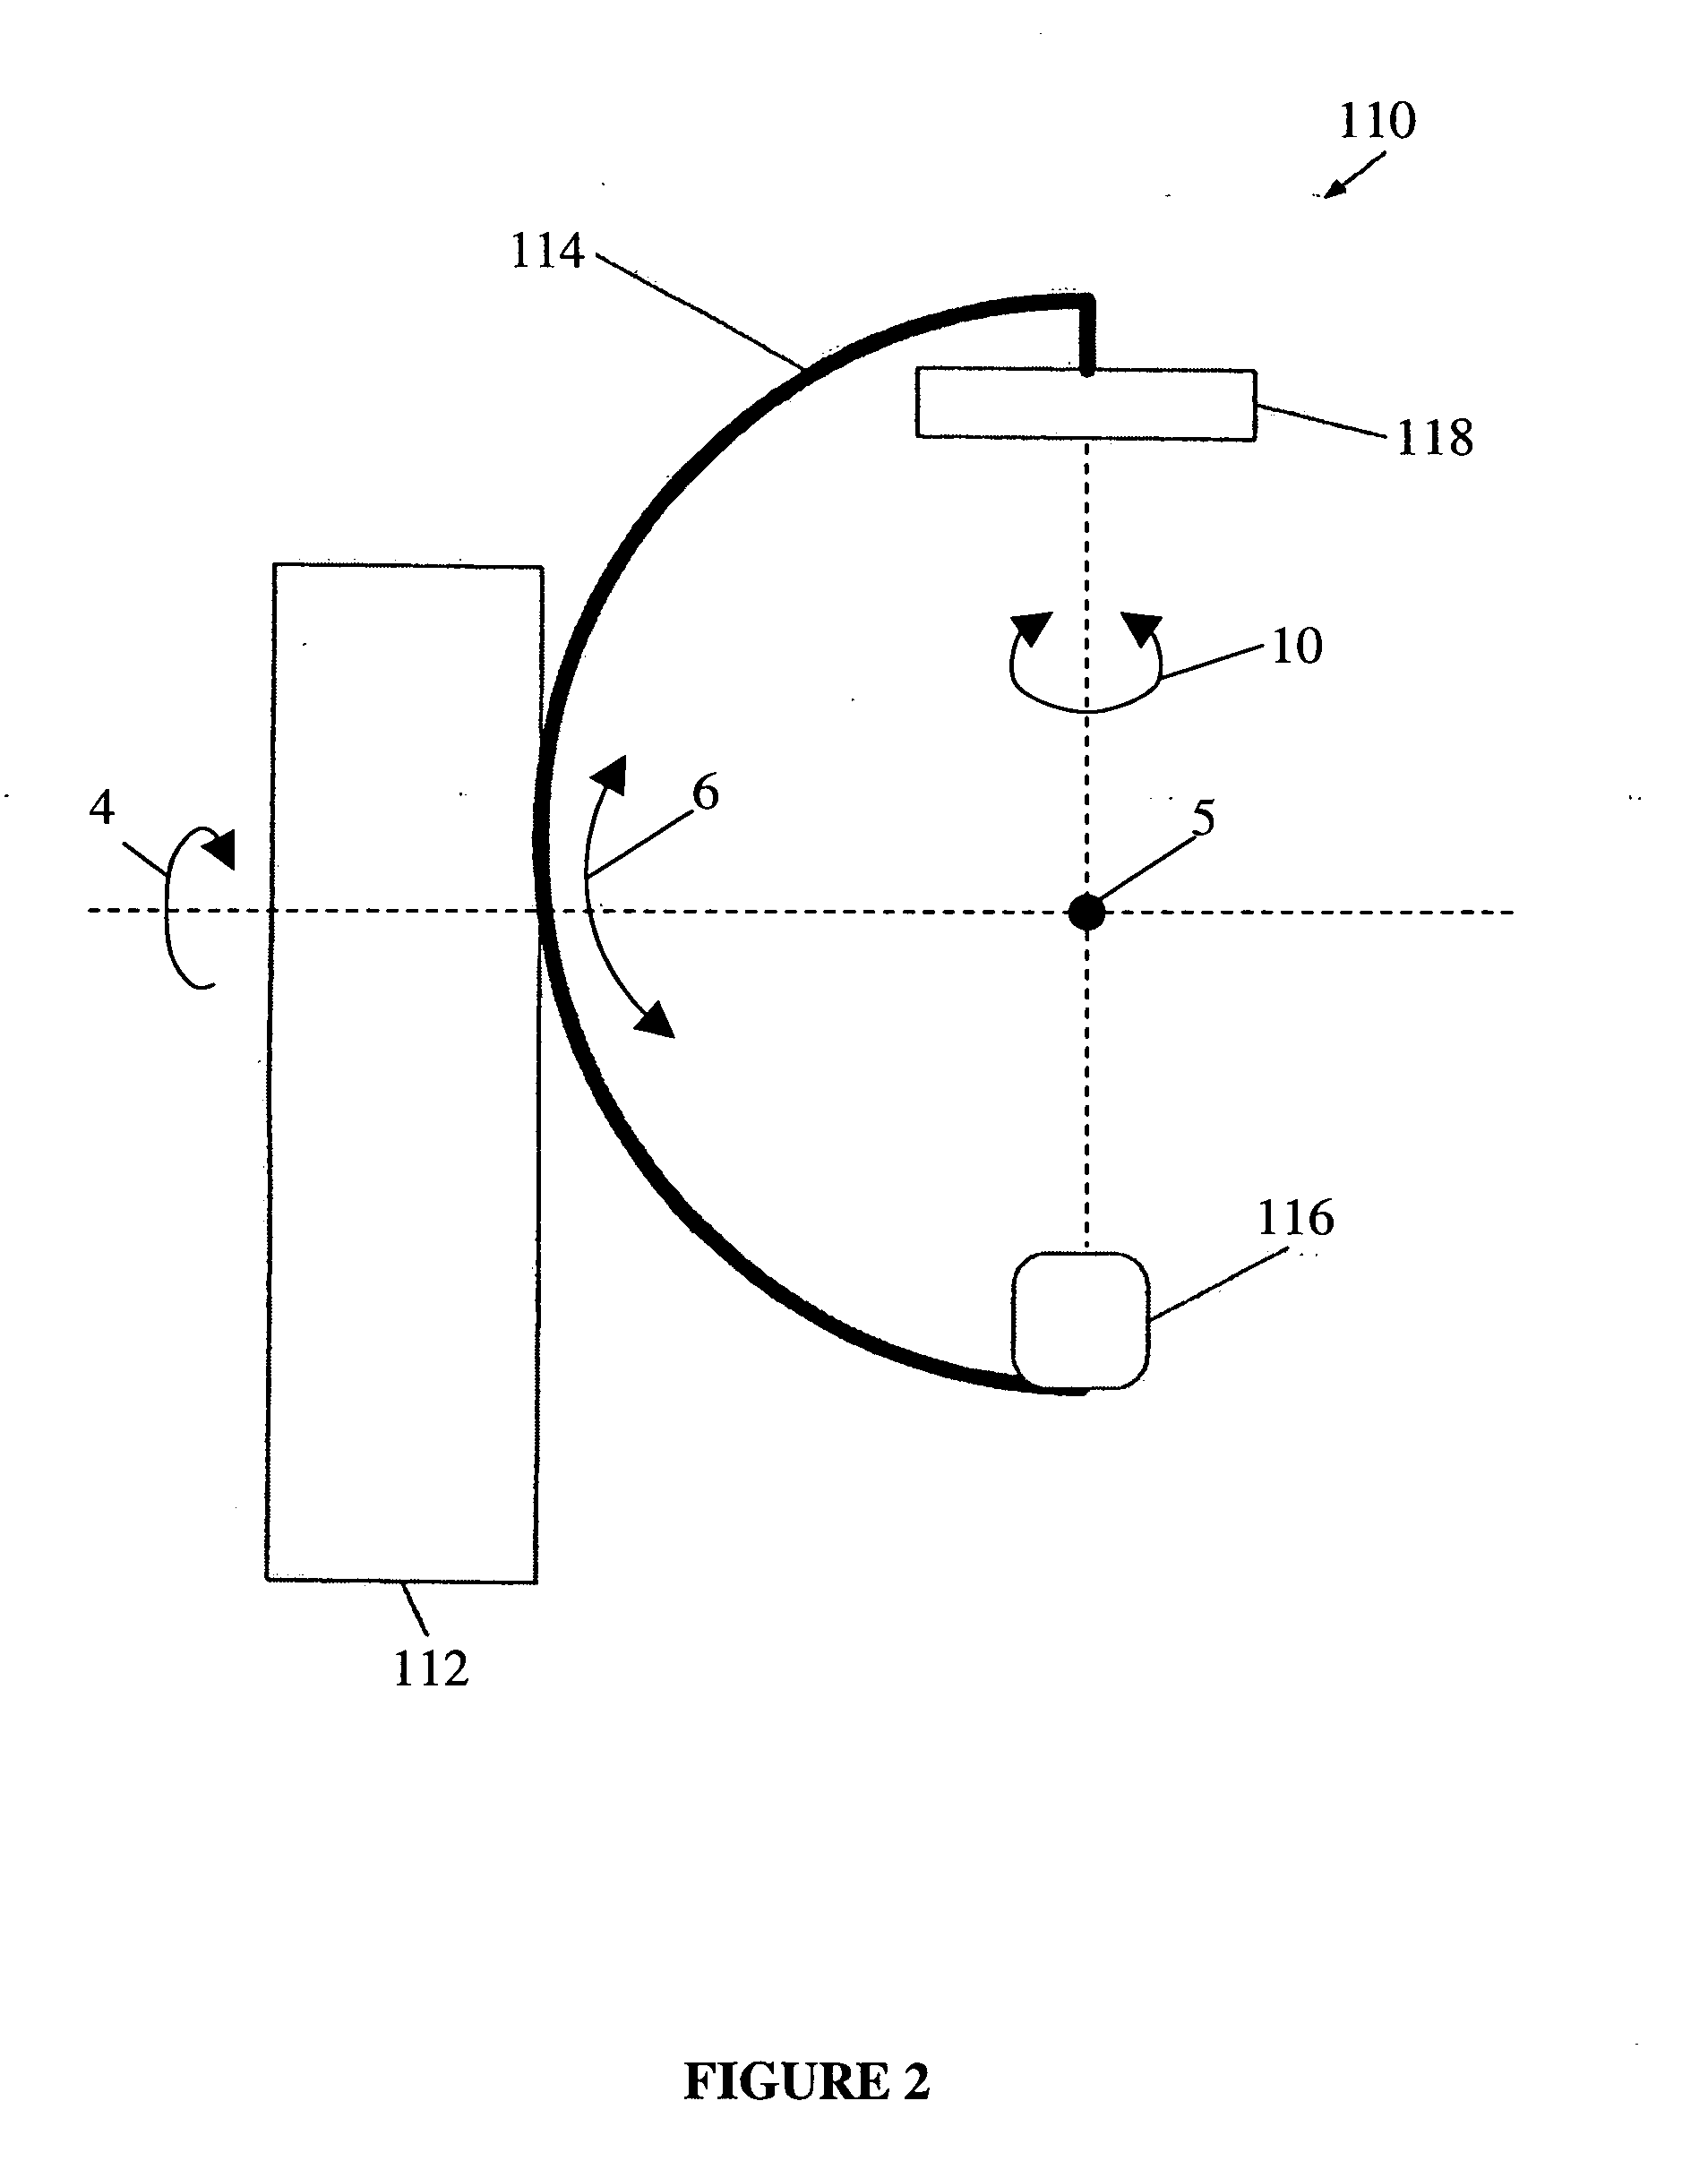 C-arm device with adjustable detector offset for cone beam imaging involving partial circle scan trajectories